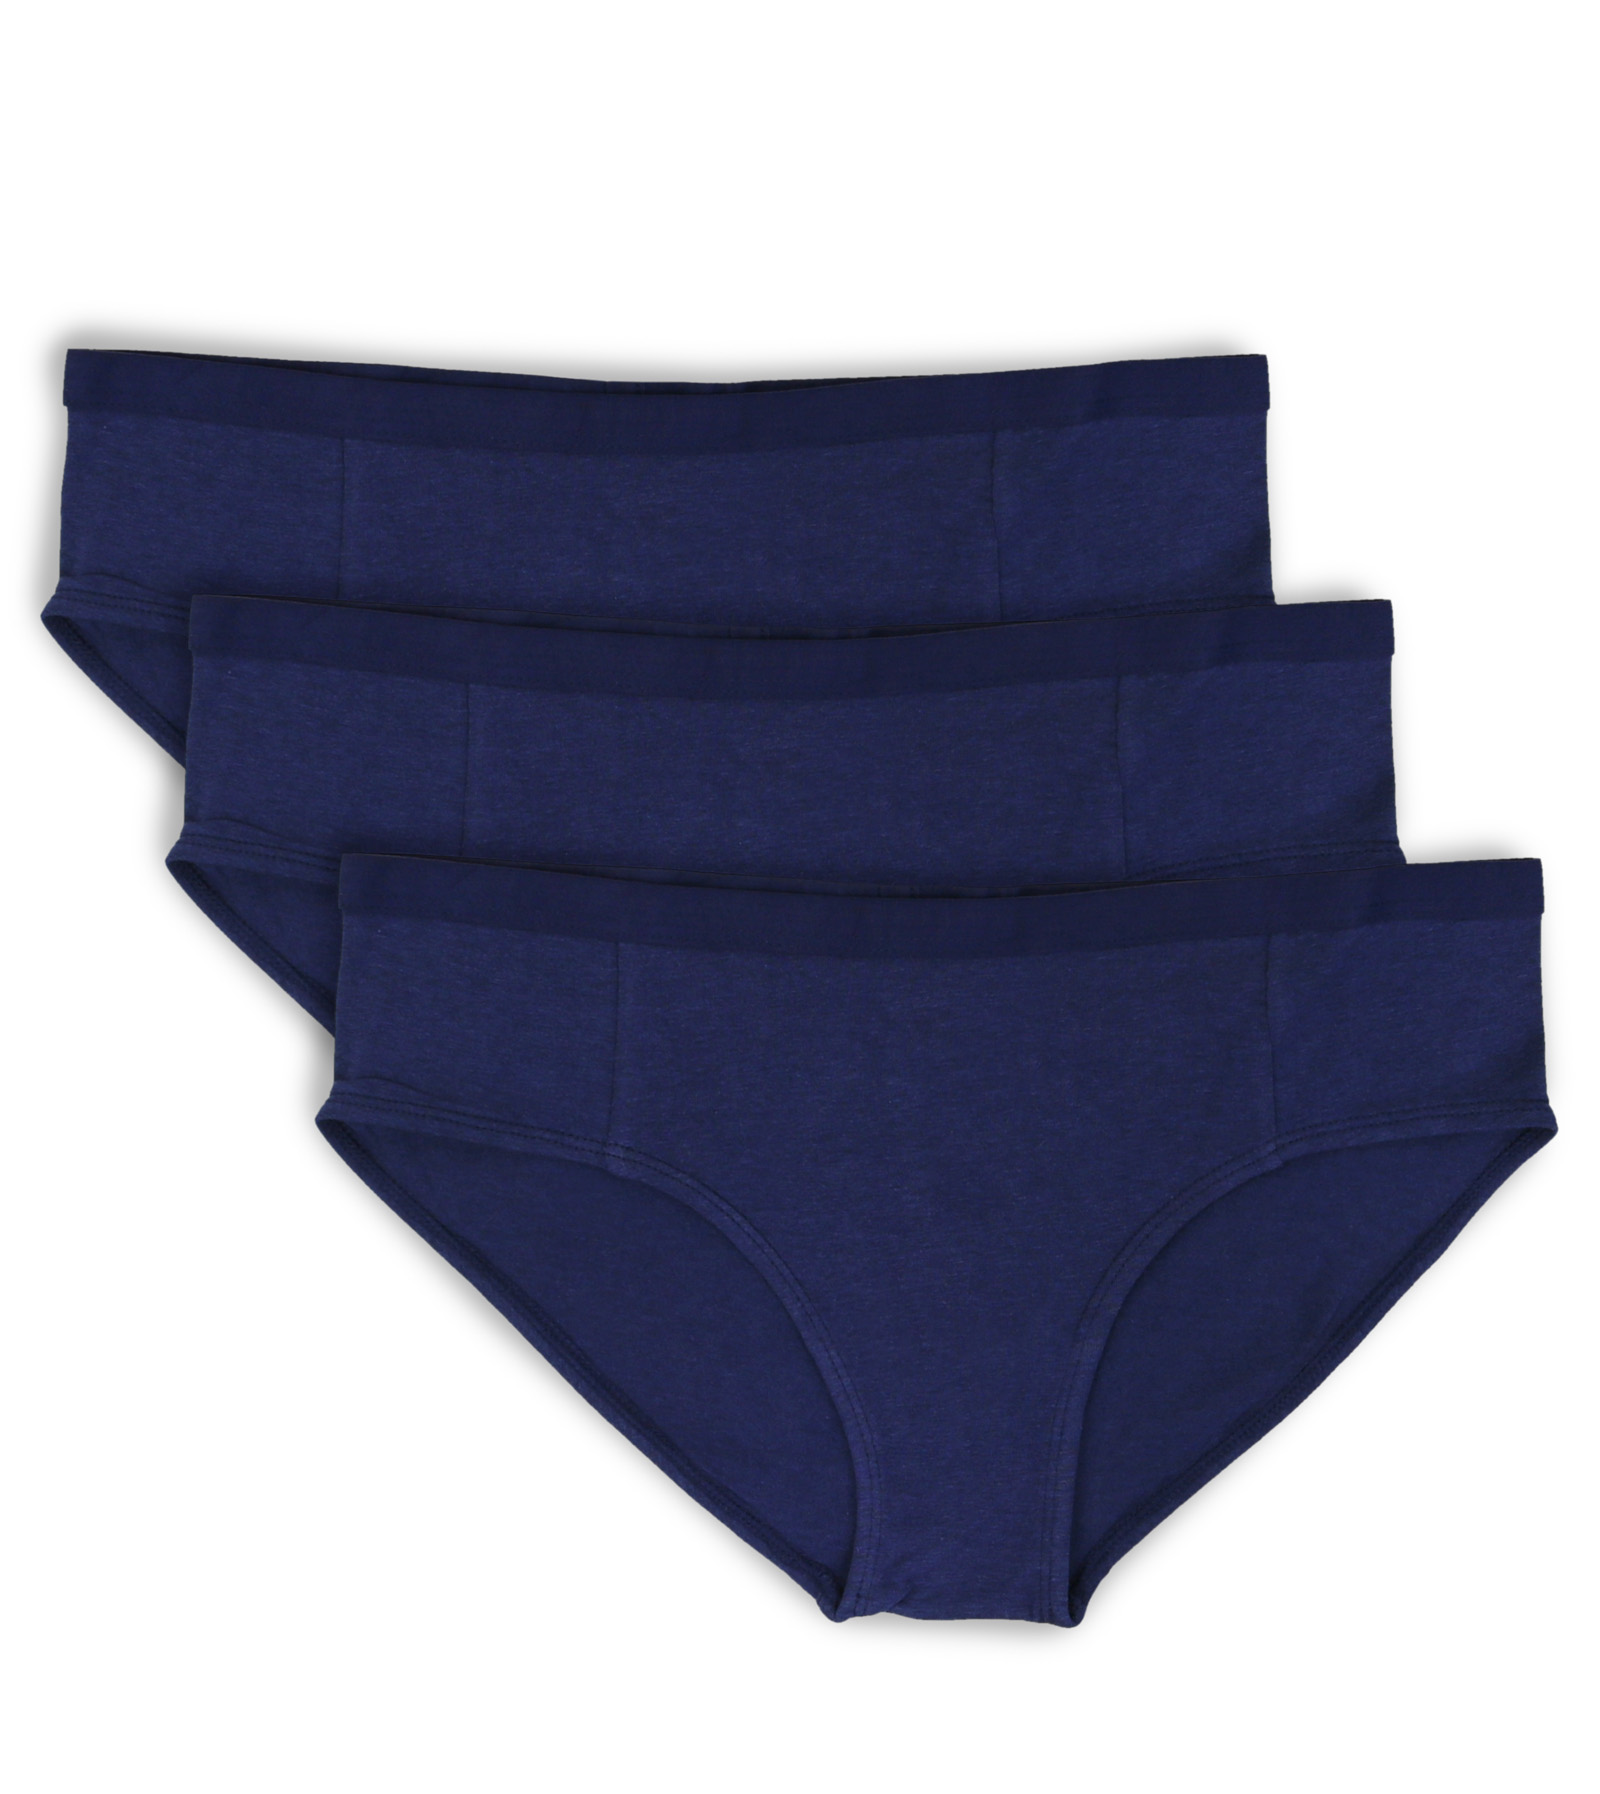 Hipster Briefs Pack of 3 – GARY MASH